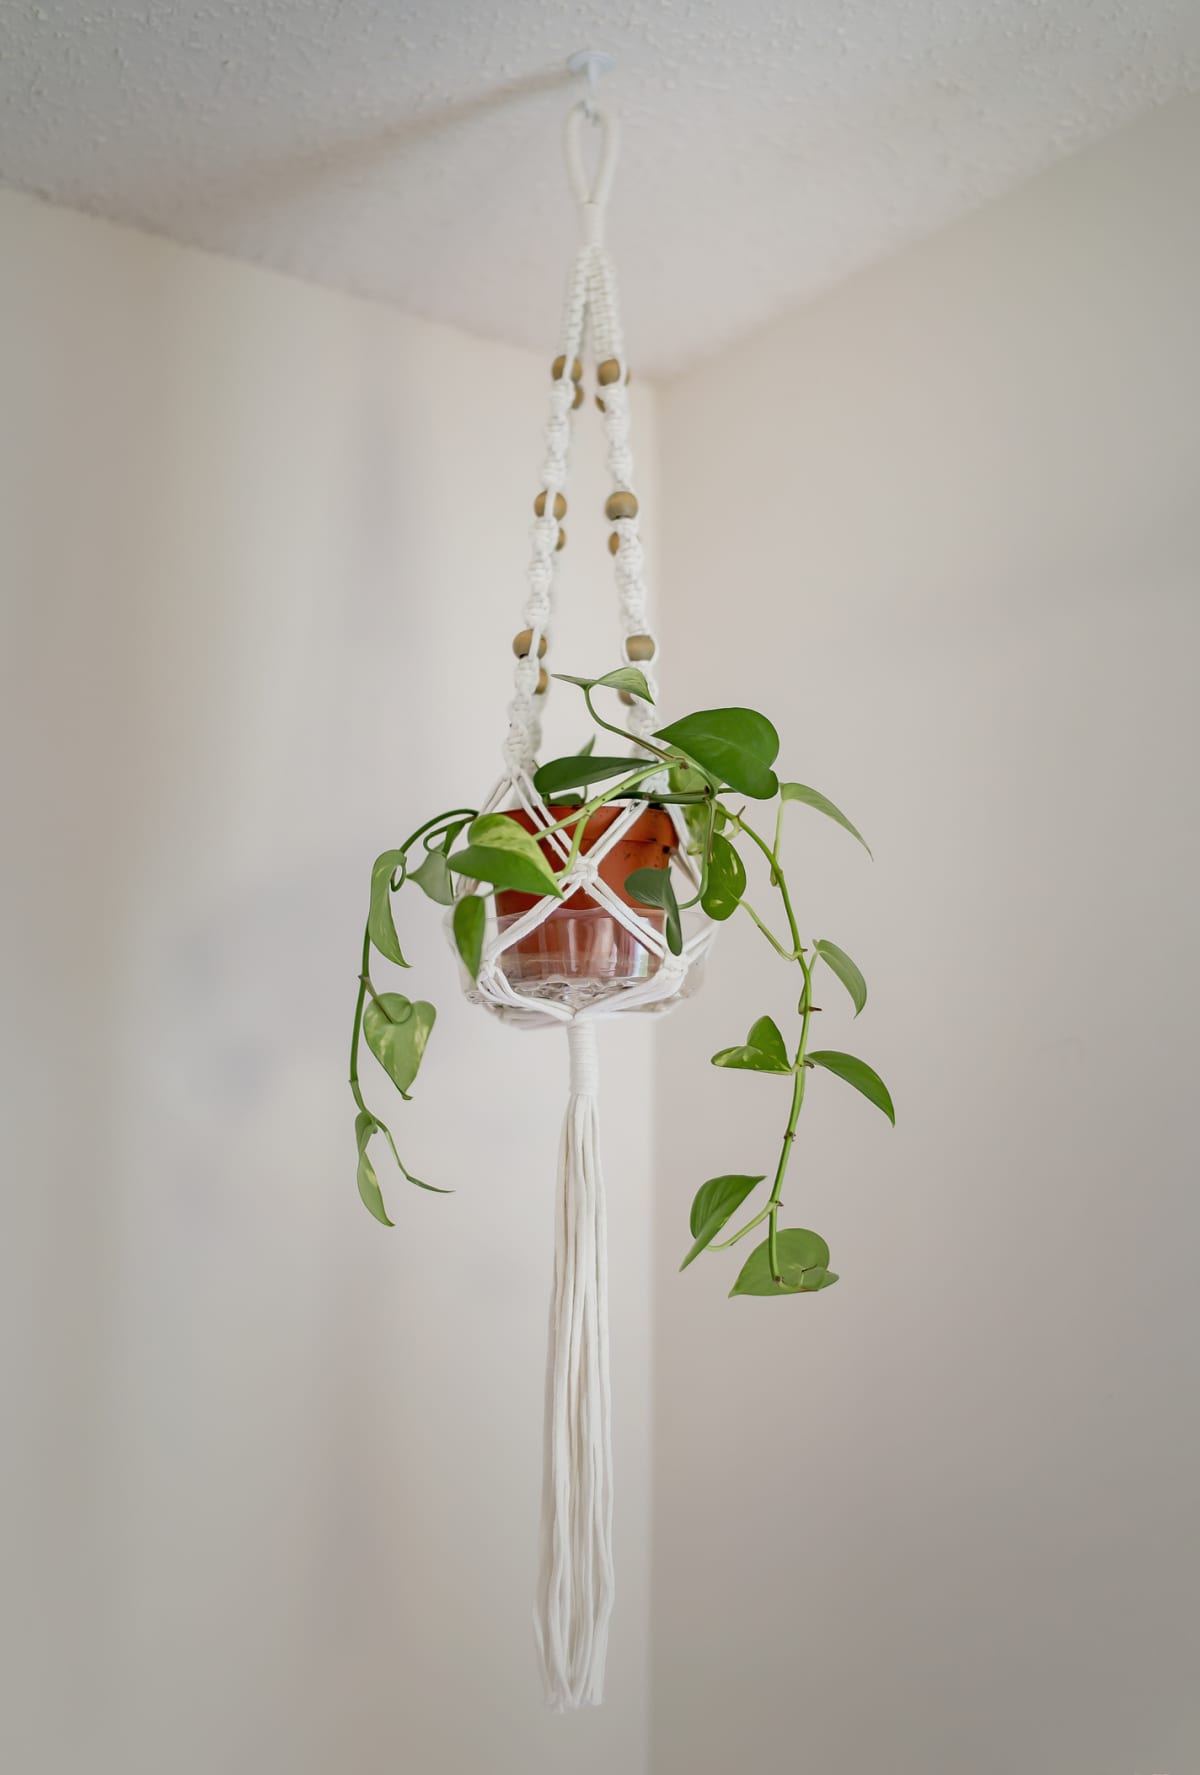 Small pathos plant in a macrame hanger in the corner of a room